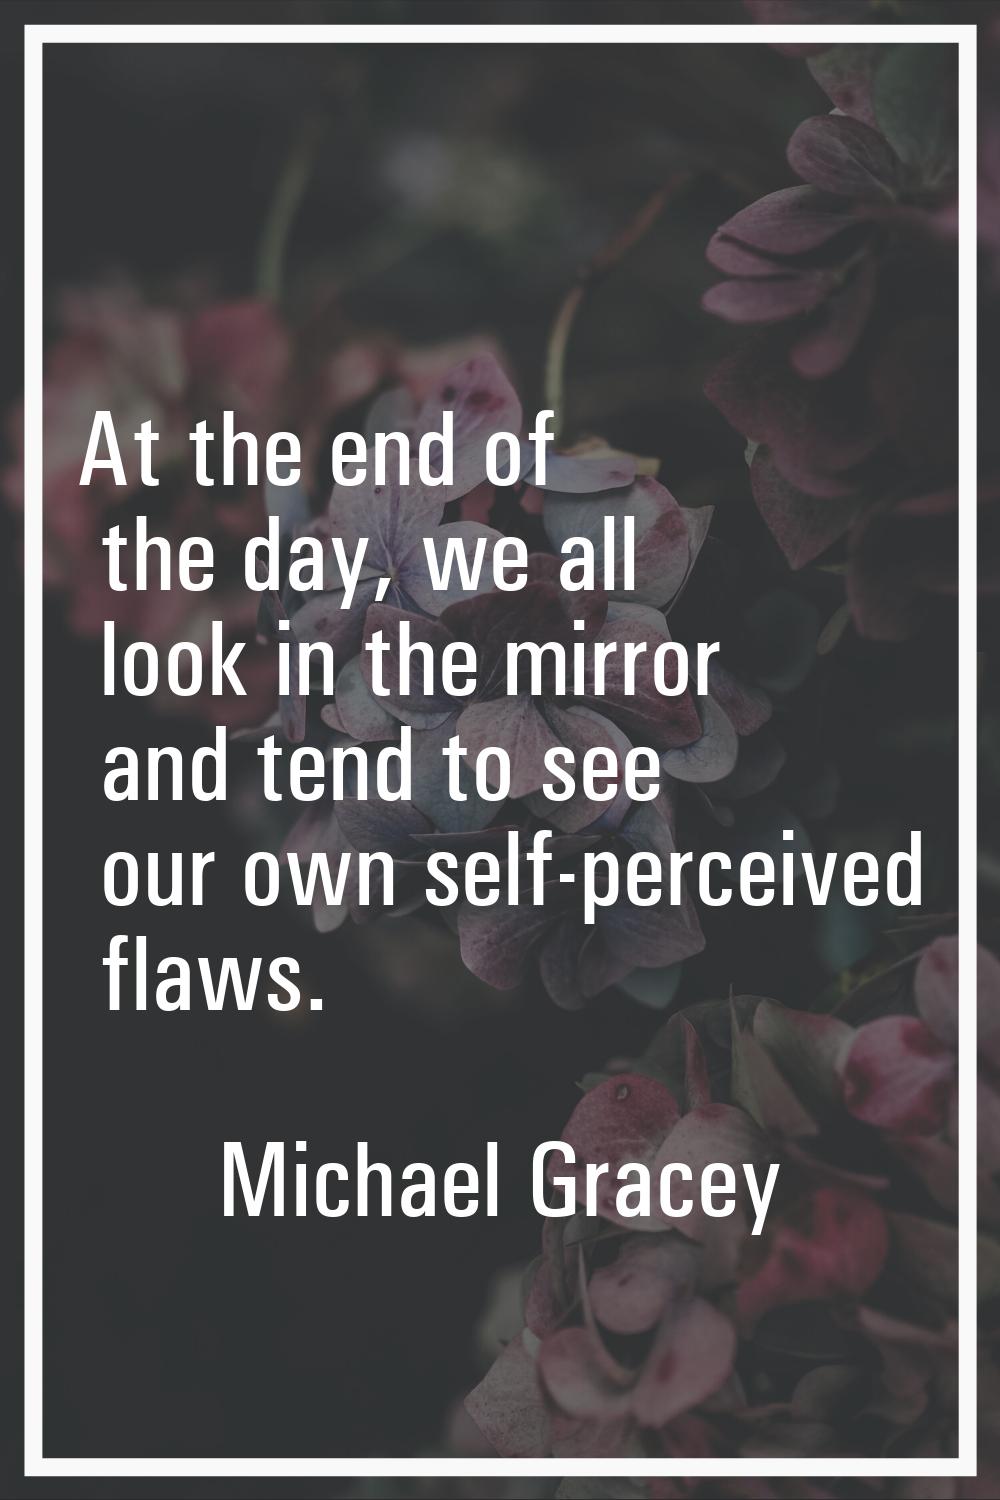 At the end of the day, we all look in the mirror and tend to see our own self-perceived flaws.